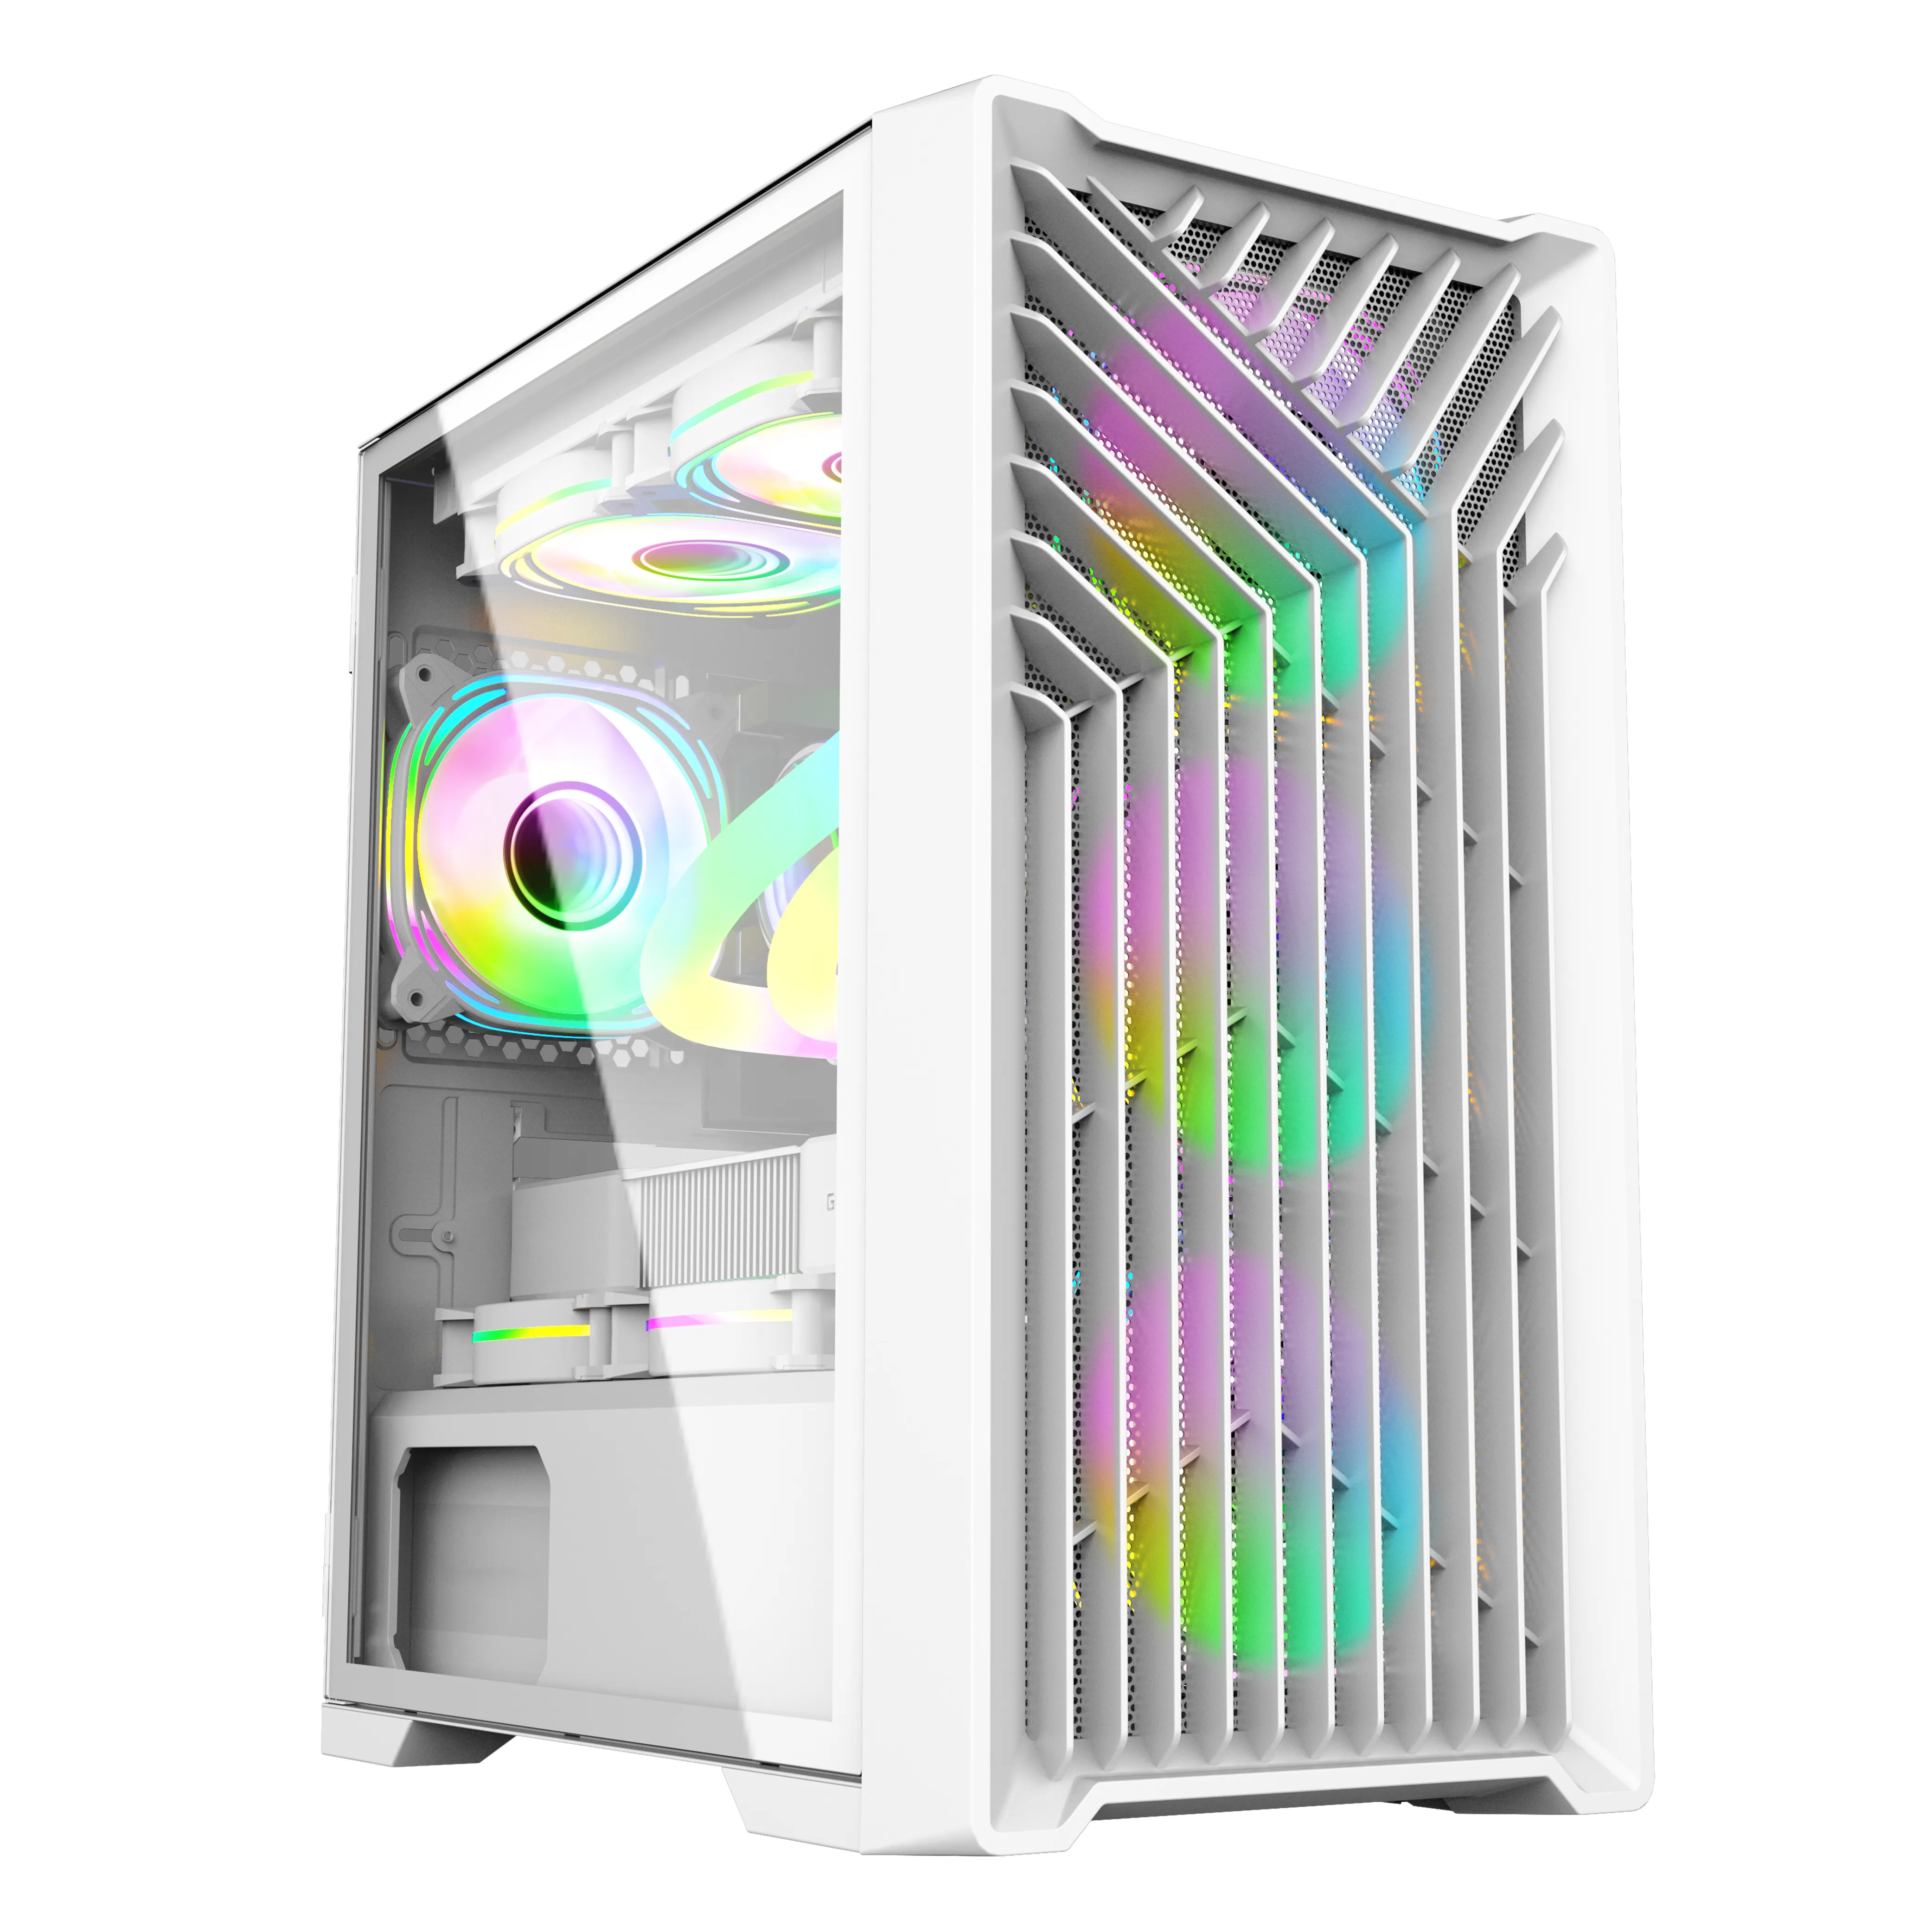 bulk carbon fiber front panel with power supply cooler deluxe RGB manufacturing white gaming for pc case